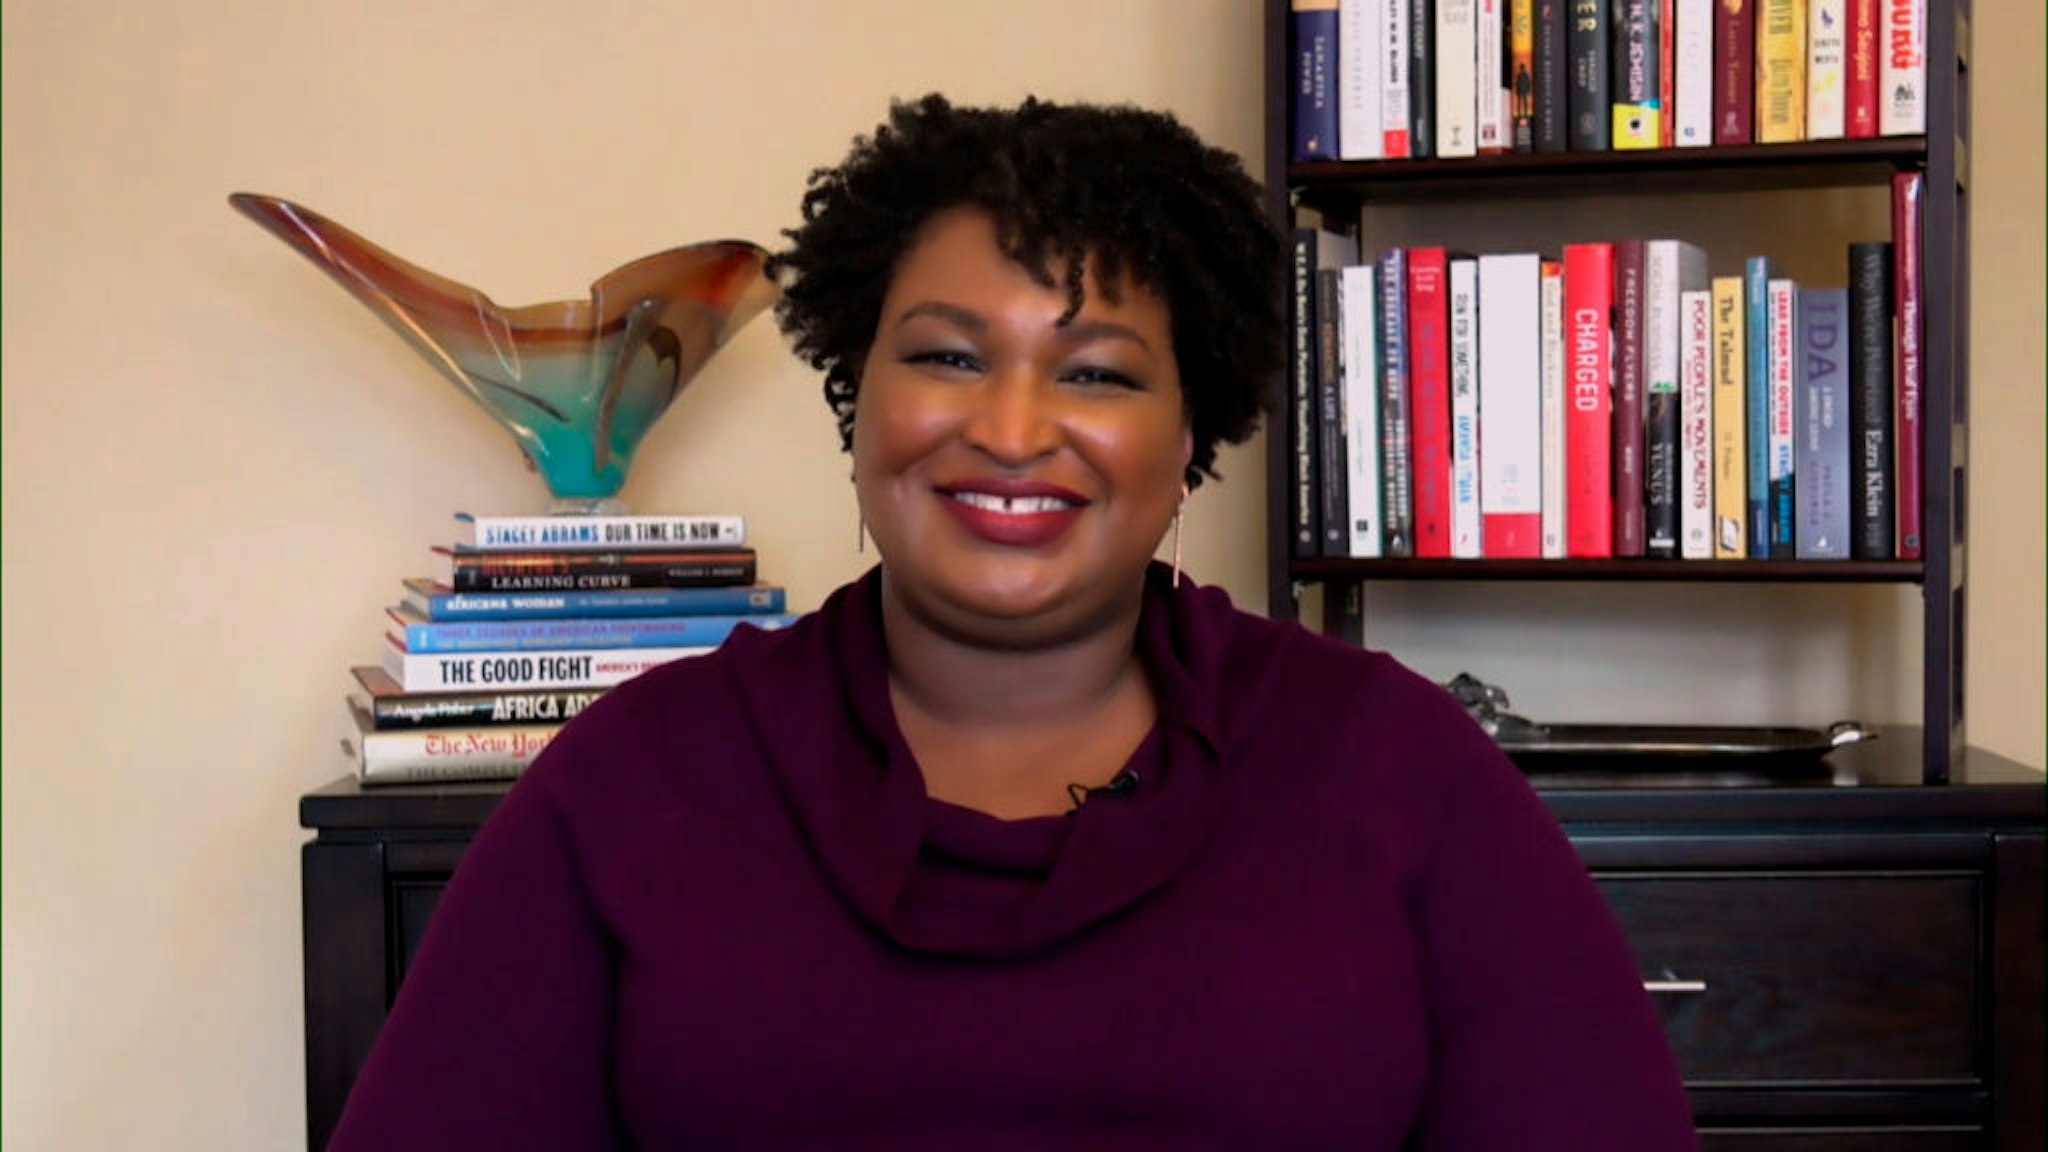 THE TONIGHT SHOW STARRING JIMMY FALLON -- Episode1345A -- Pictured in this screengrab: Politician Stacey Abrams during an interview on October 30, 2020 -- (Photo By: NBC/NBCU Photo Bank via Getty Images)